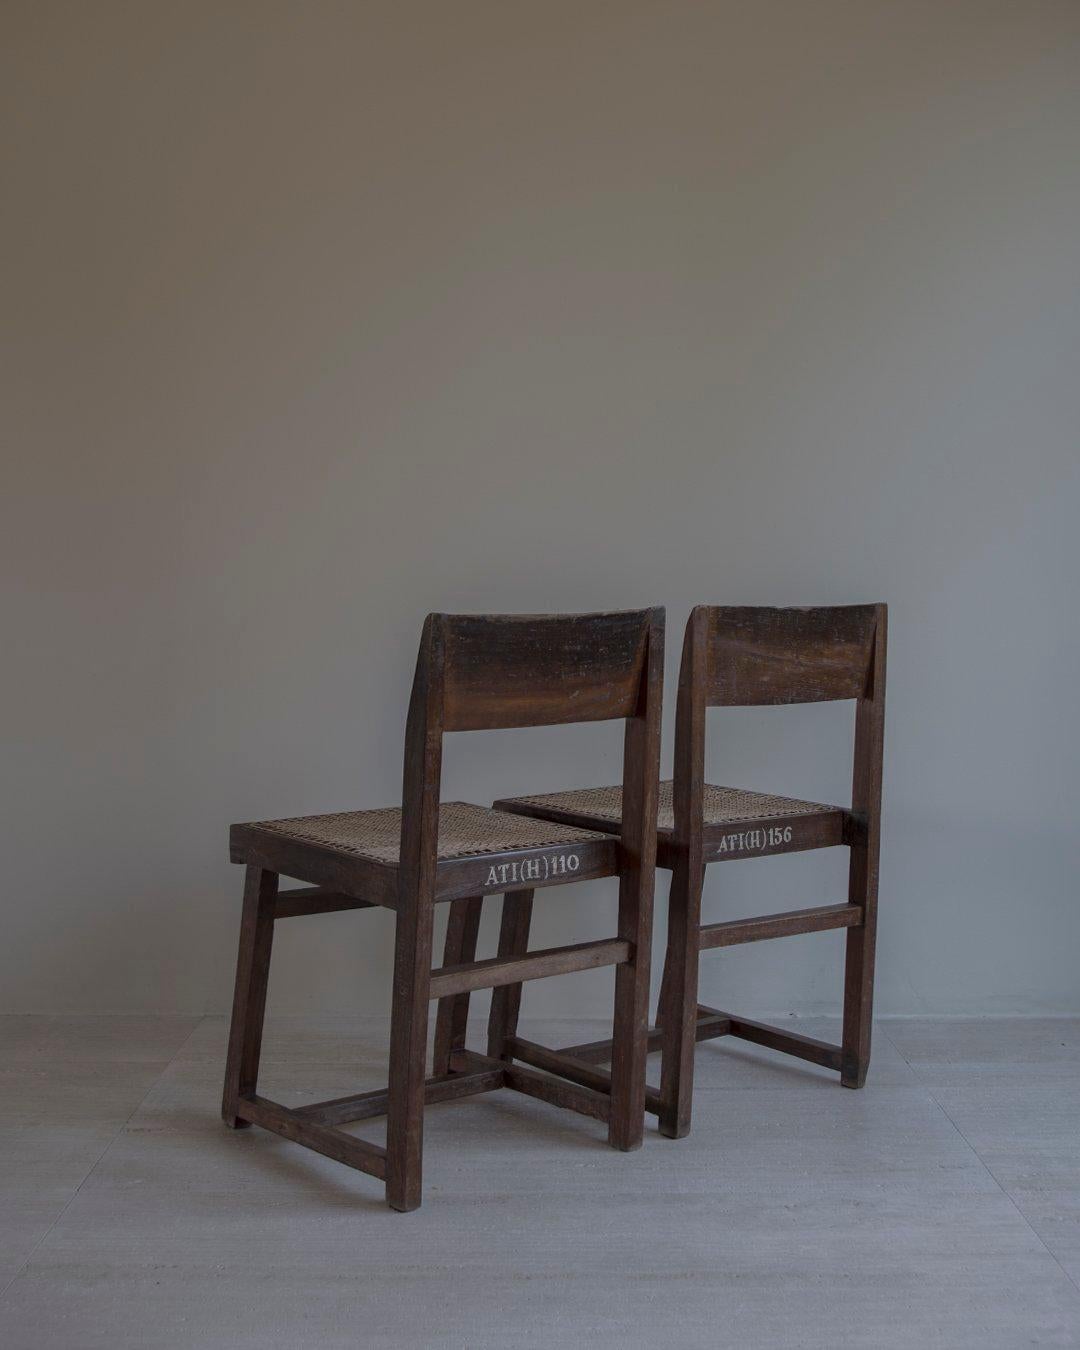 (A set of 4 available / price per piece) authentic PJ-SI-54-A box chairs by Pierre Jeanneret - Sometimes named the PJ-010204 teak chair.

Overall good condition, amazing patina and all chairs have numbered marks, one of the pieces has metal